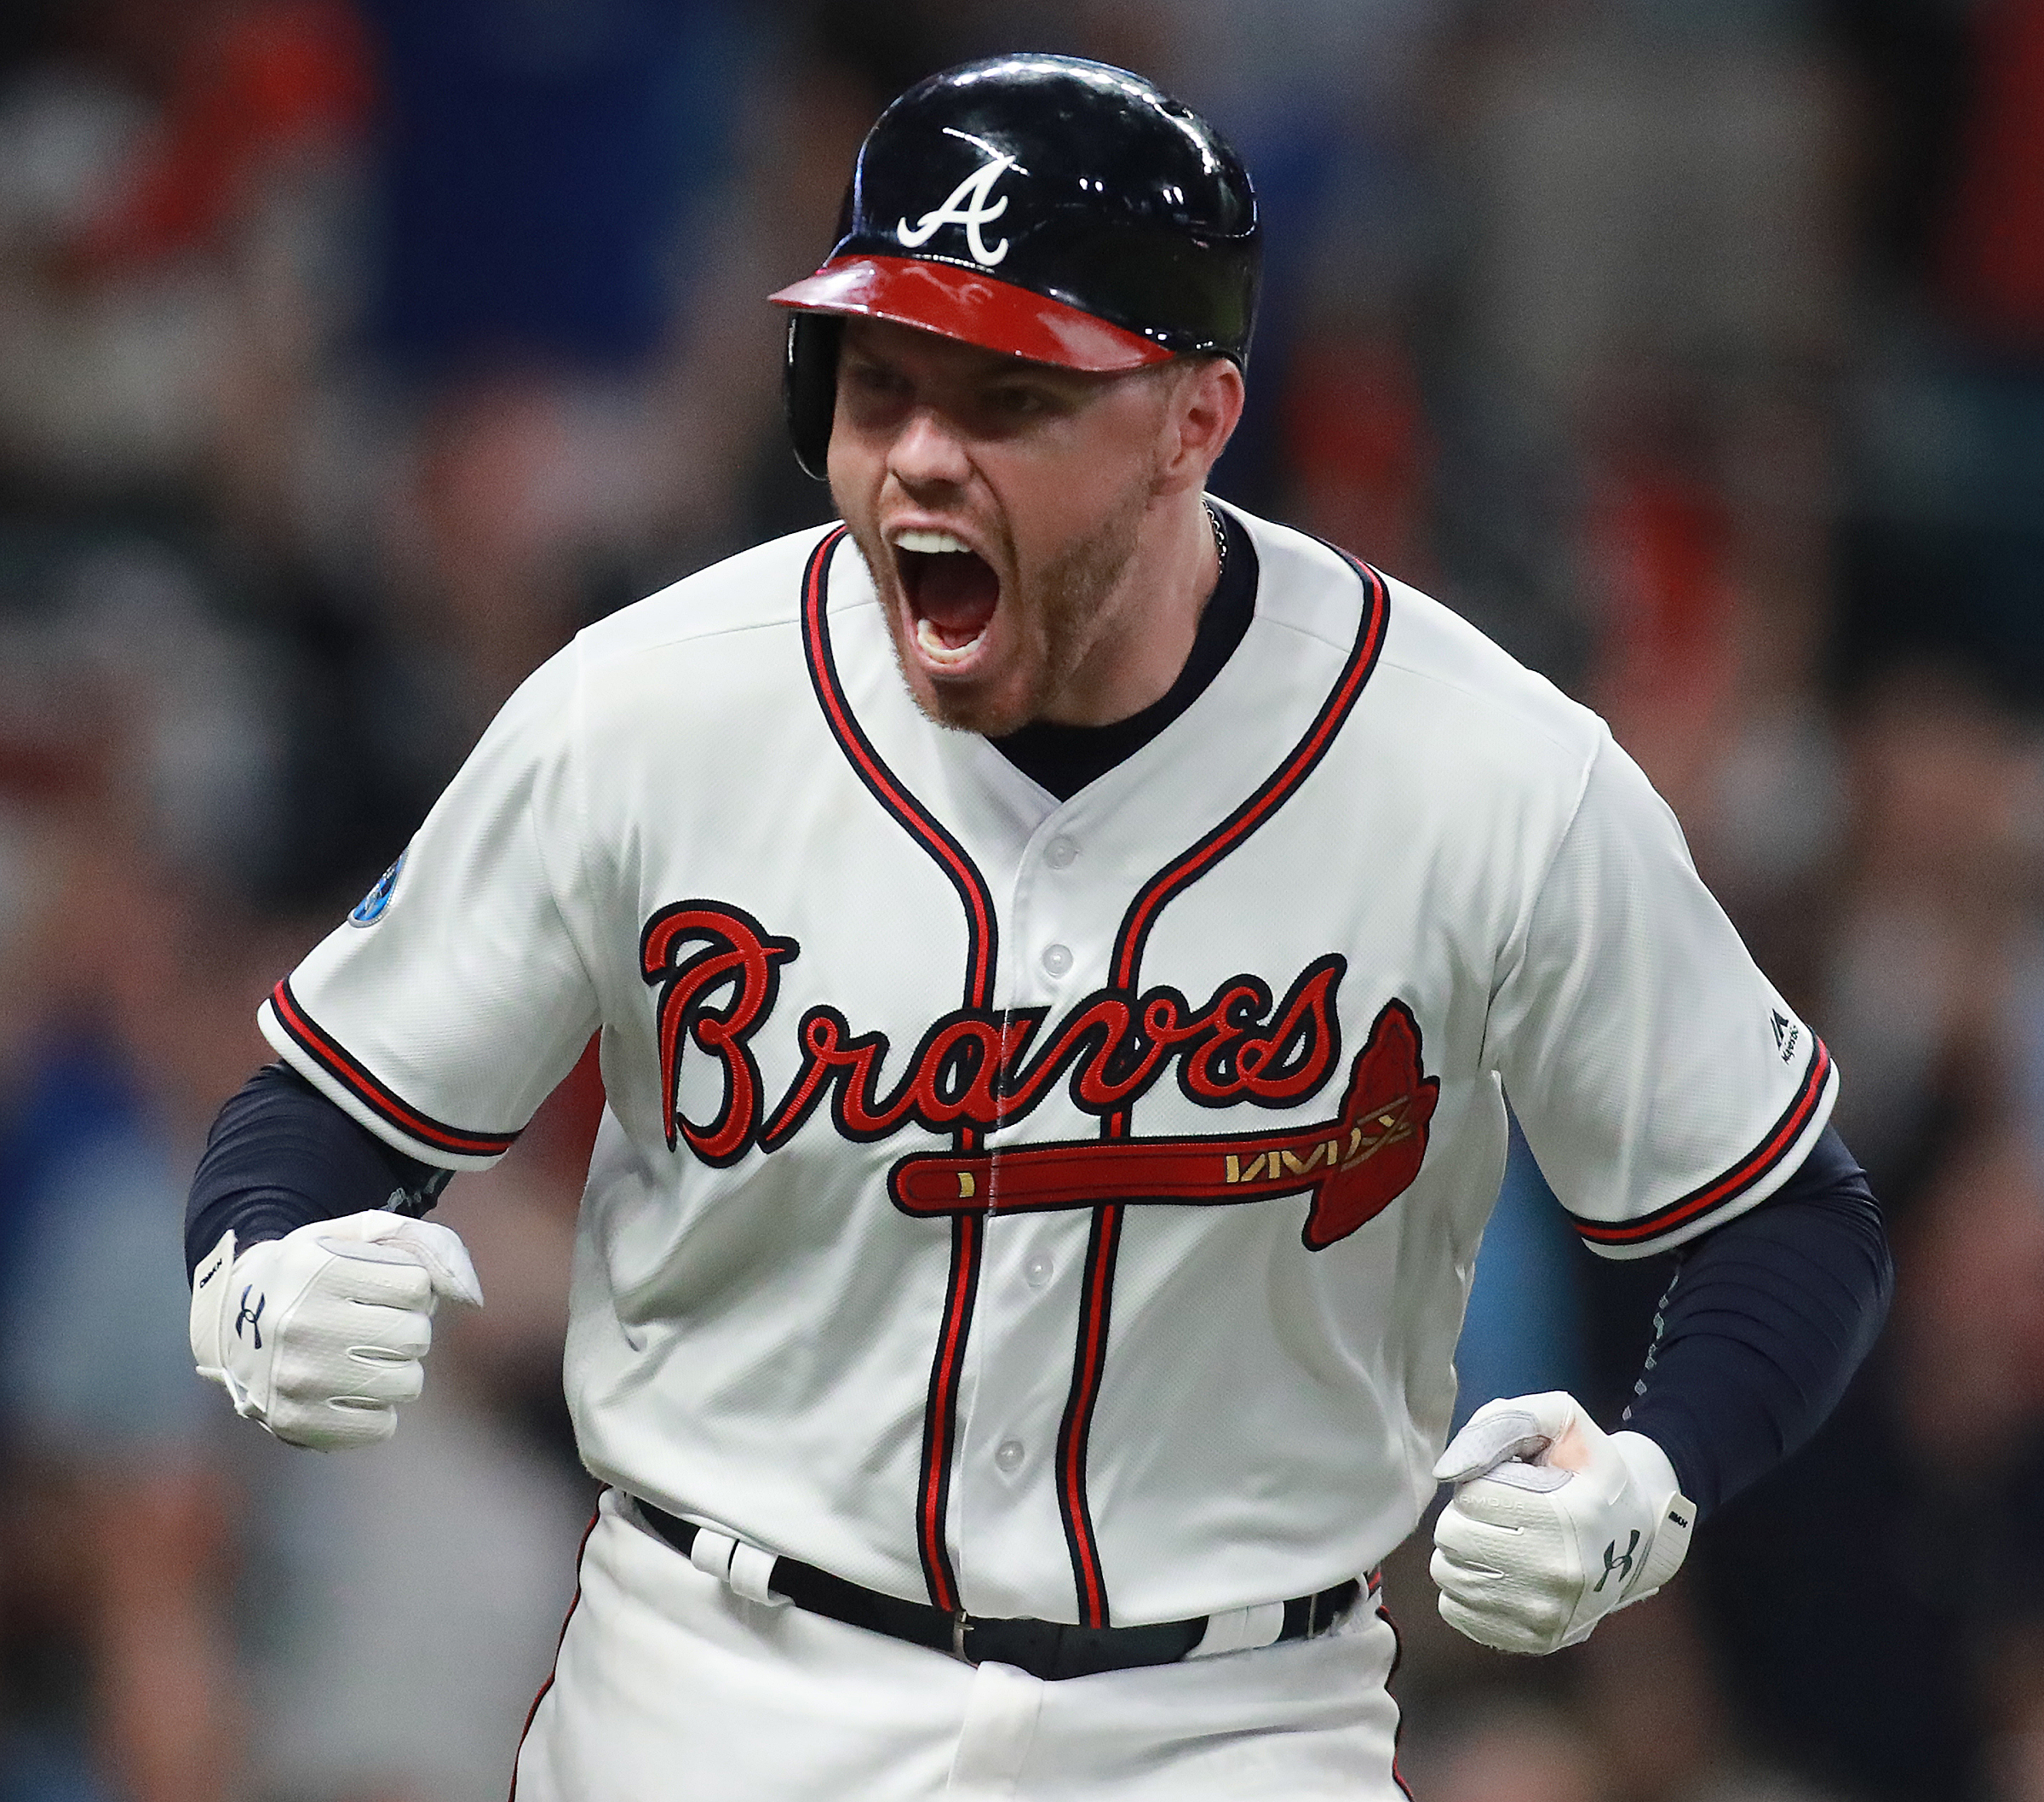 Braves vs. Dodgers is big, but this is all about Freddie Freeman